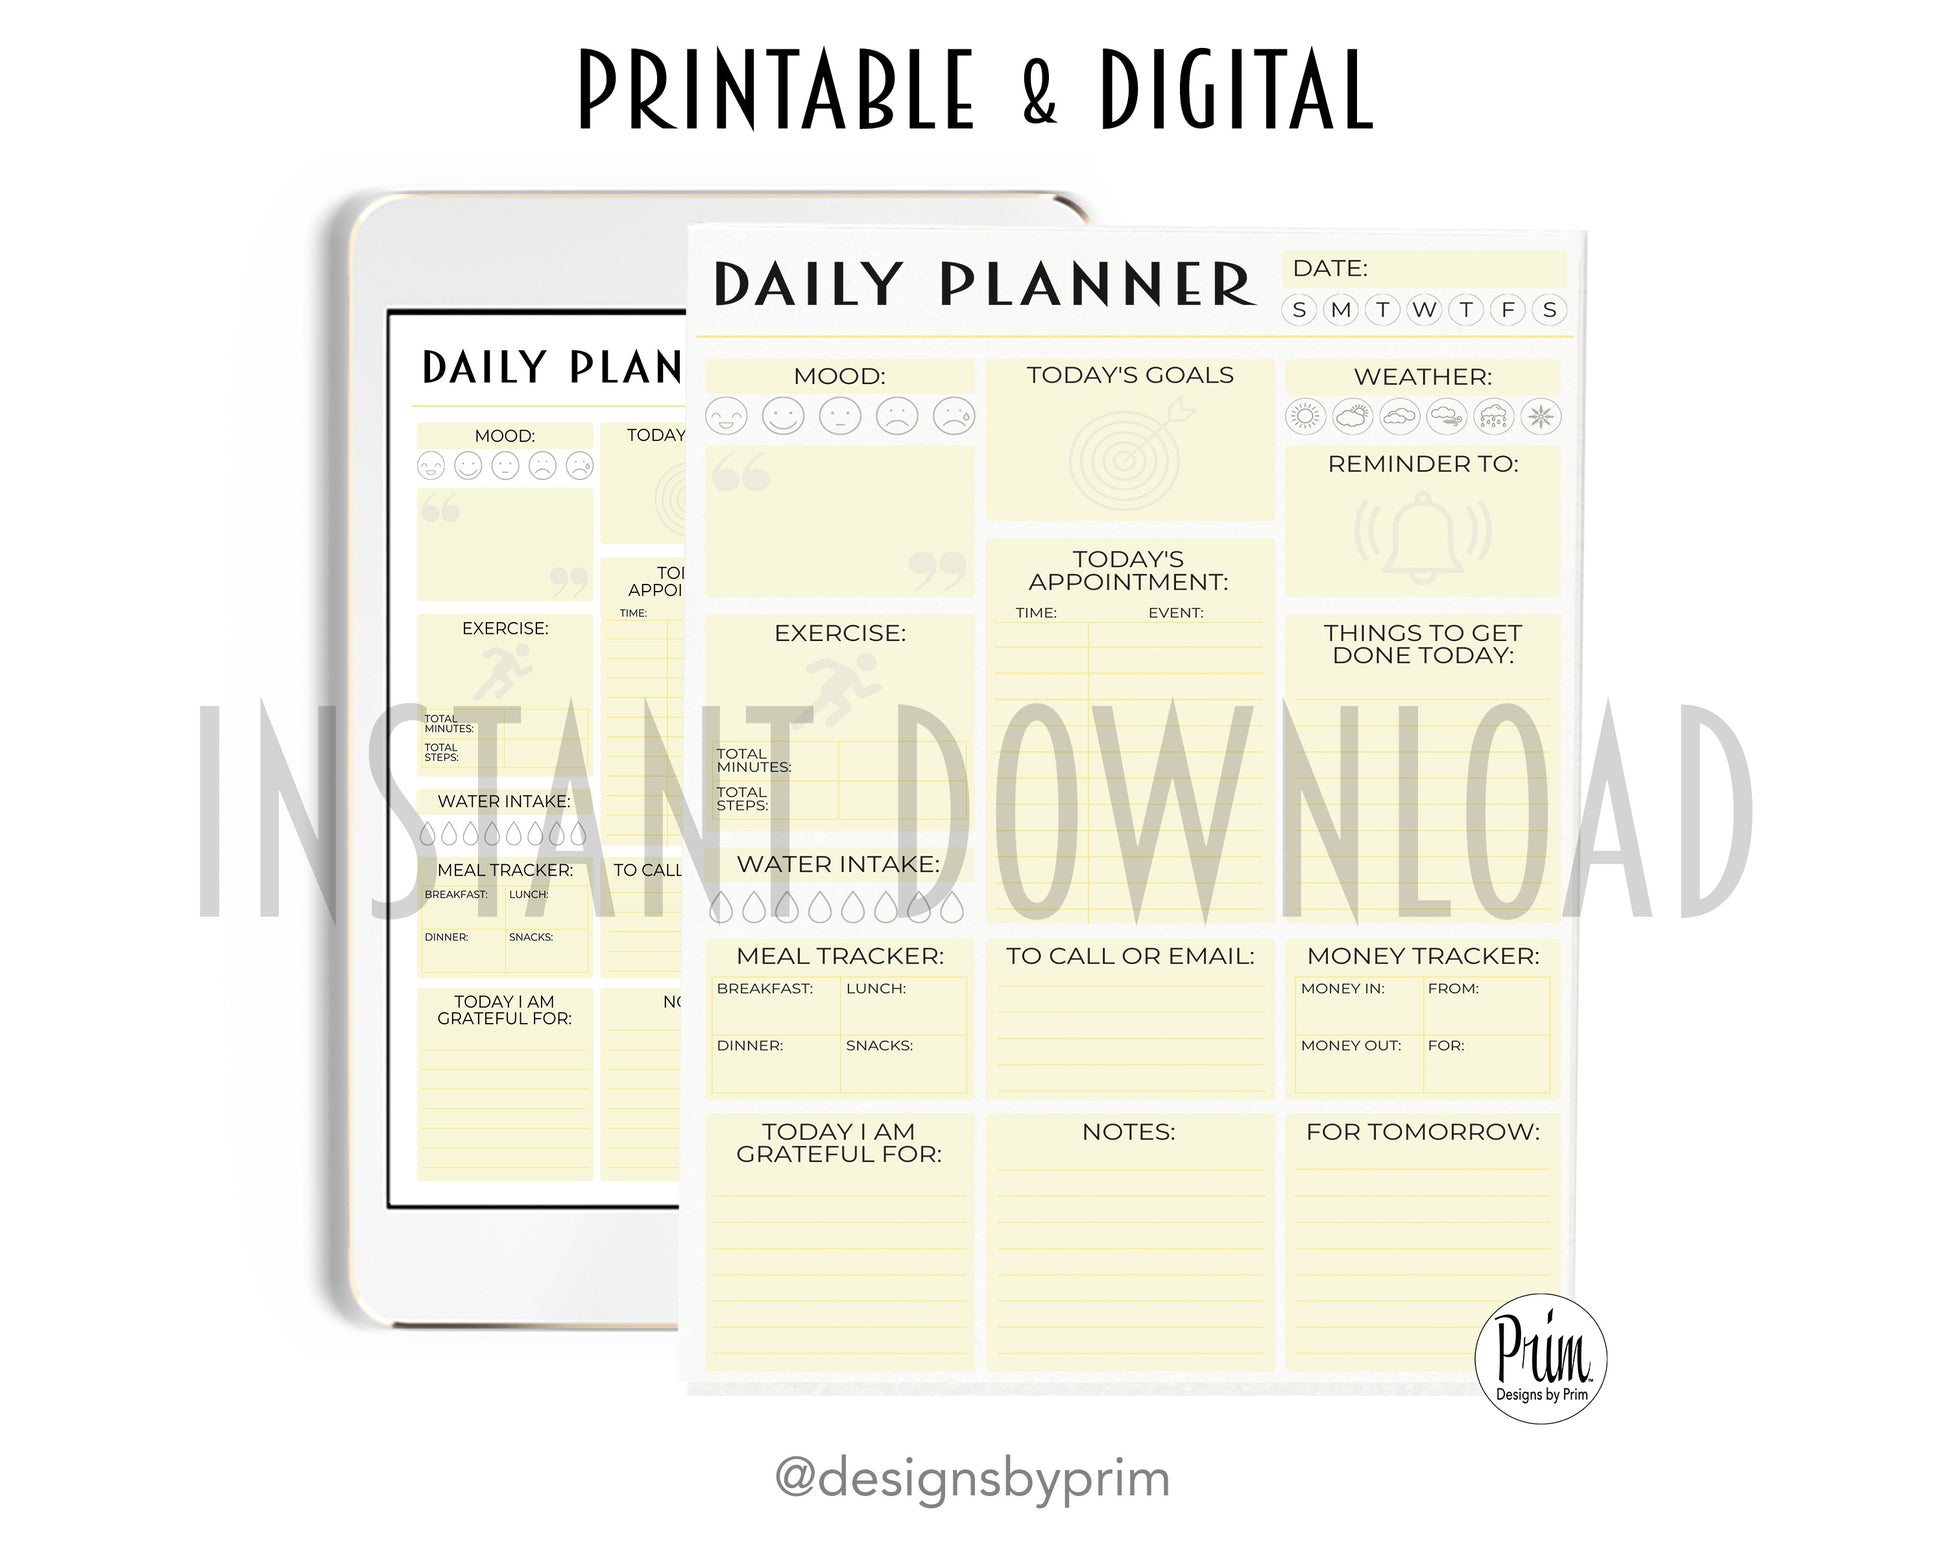 Designs by Prim Daily Planner Undated Yellow | Mood Tracker Fitness Exercise Water Intake Meal Tracker Goals Appointments Weather Reminder Money Tracker